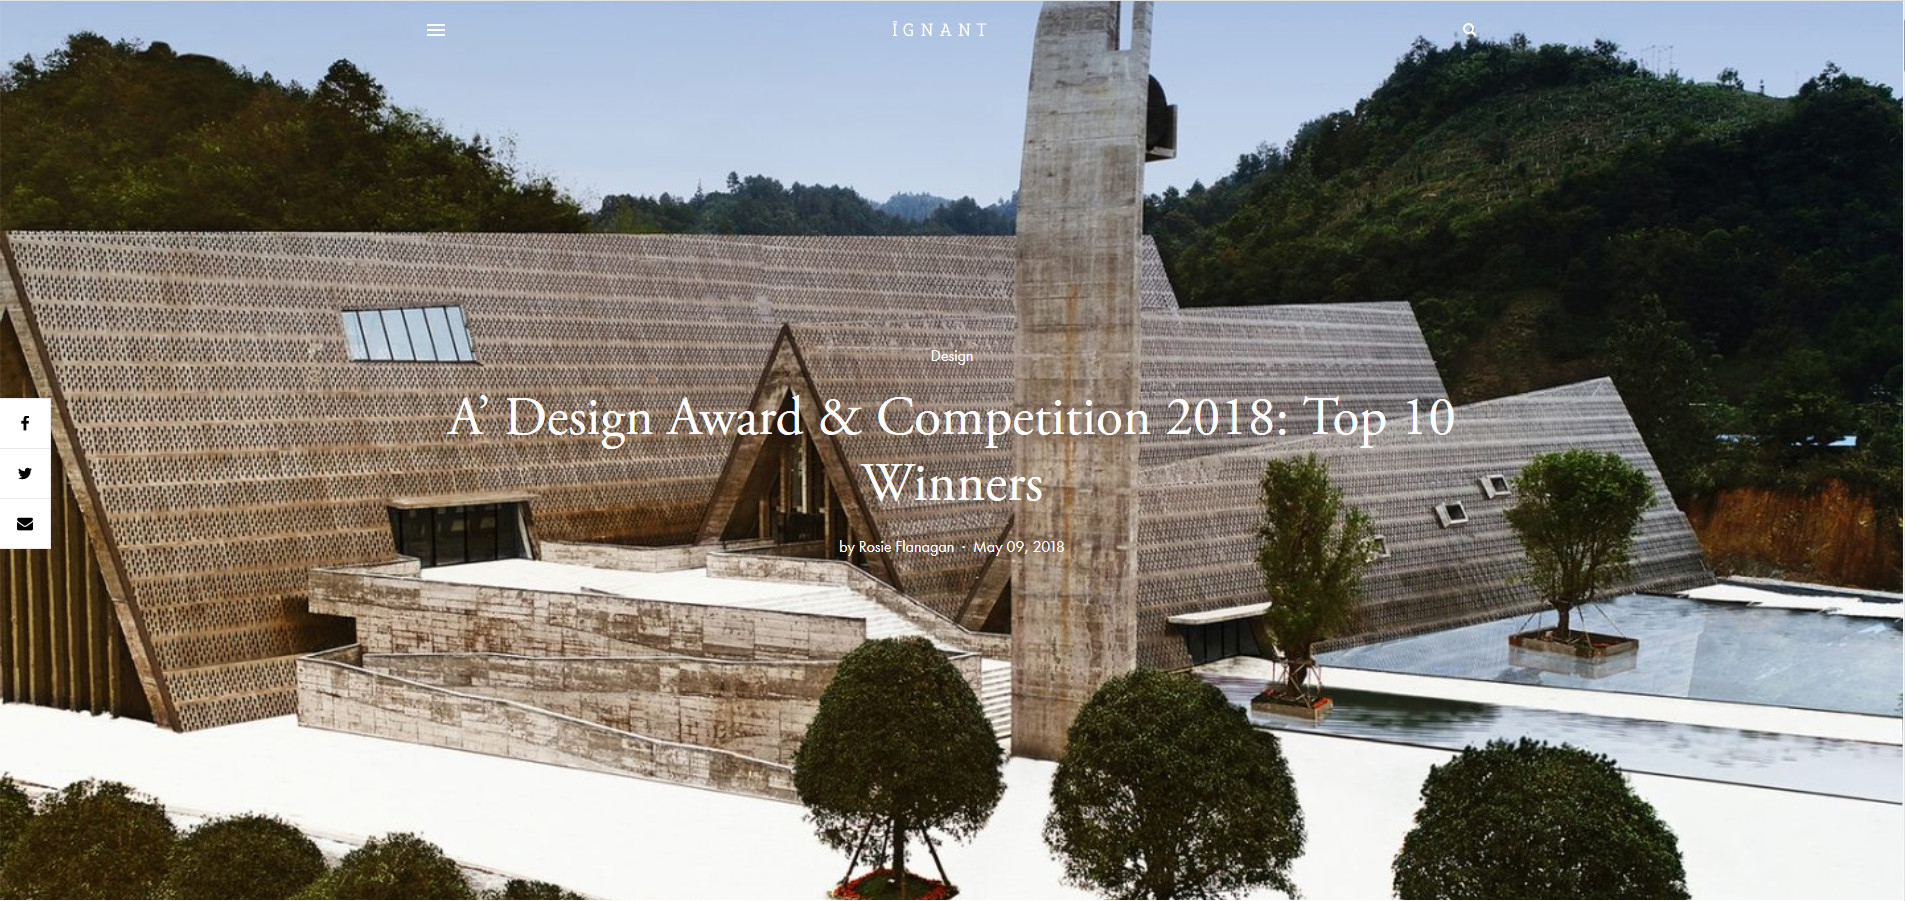 Shui Cultural Center was awarded global "Top 10 Winners" of  A' Design Award in 2018